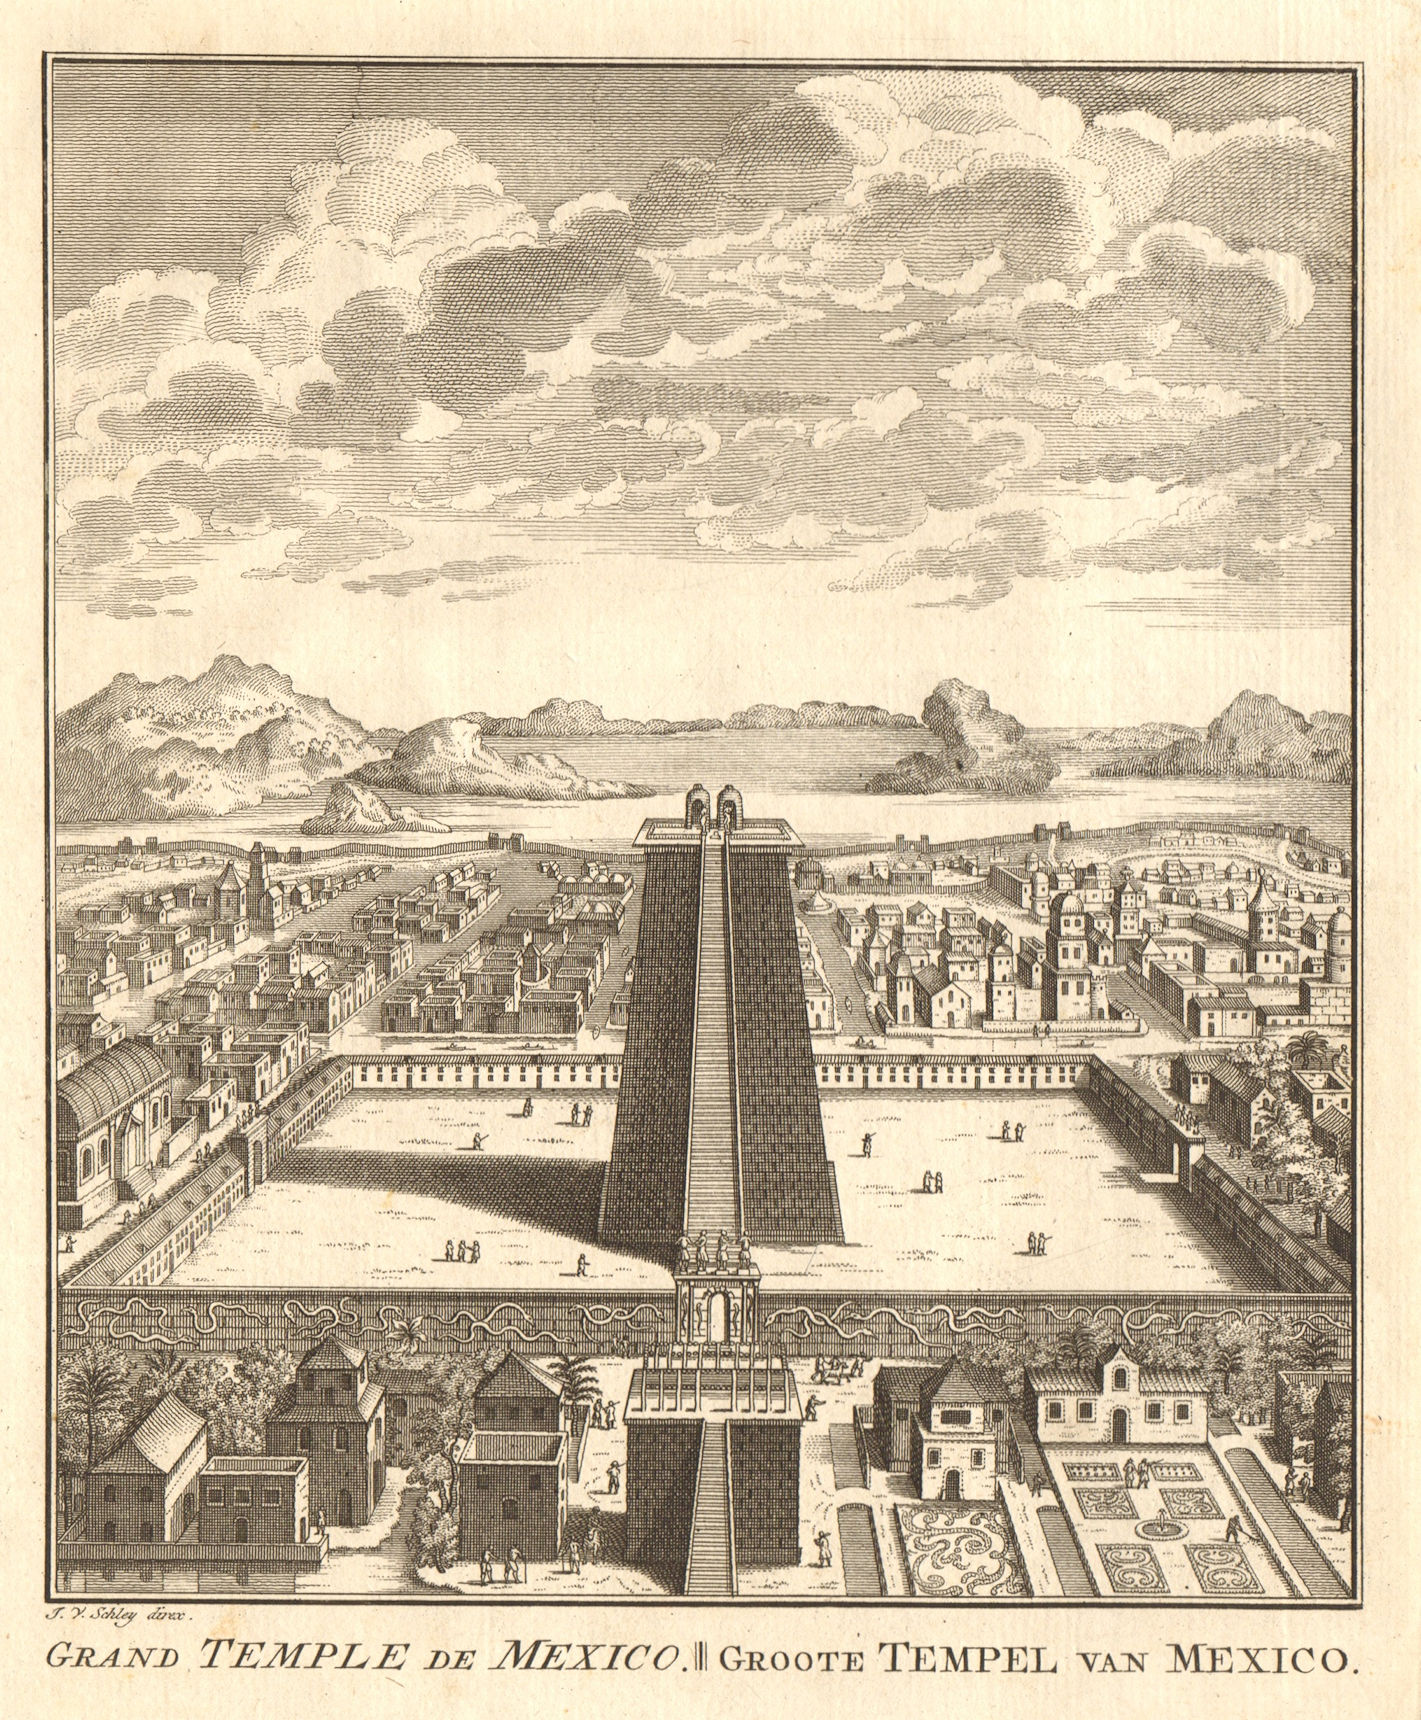 Great Temple or Templo Mayor, Tenochtitlan-Mexico City. SCHLEY 1758 old print